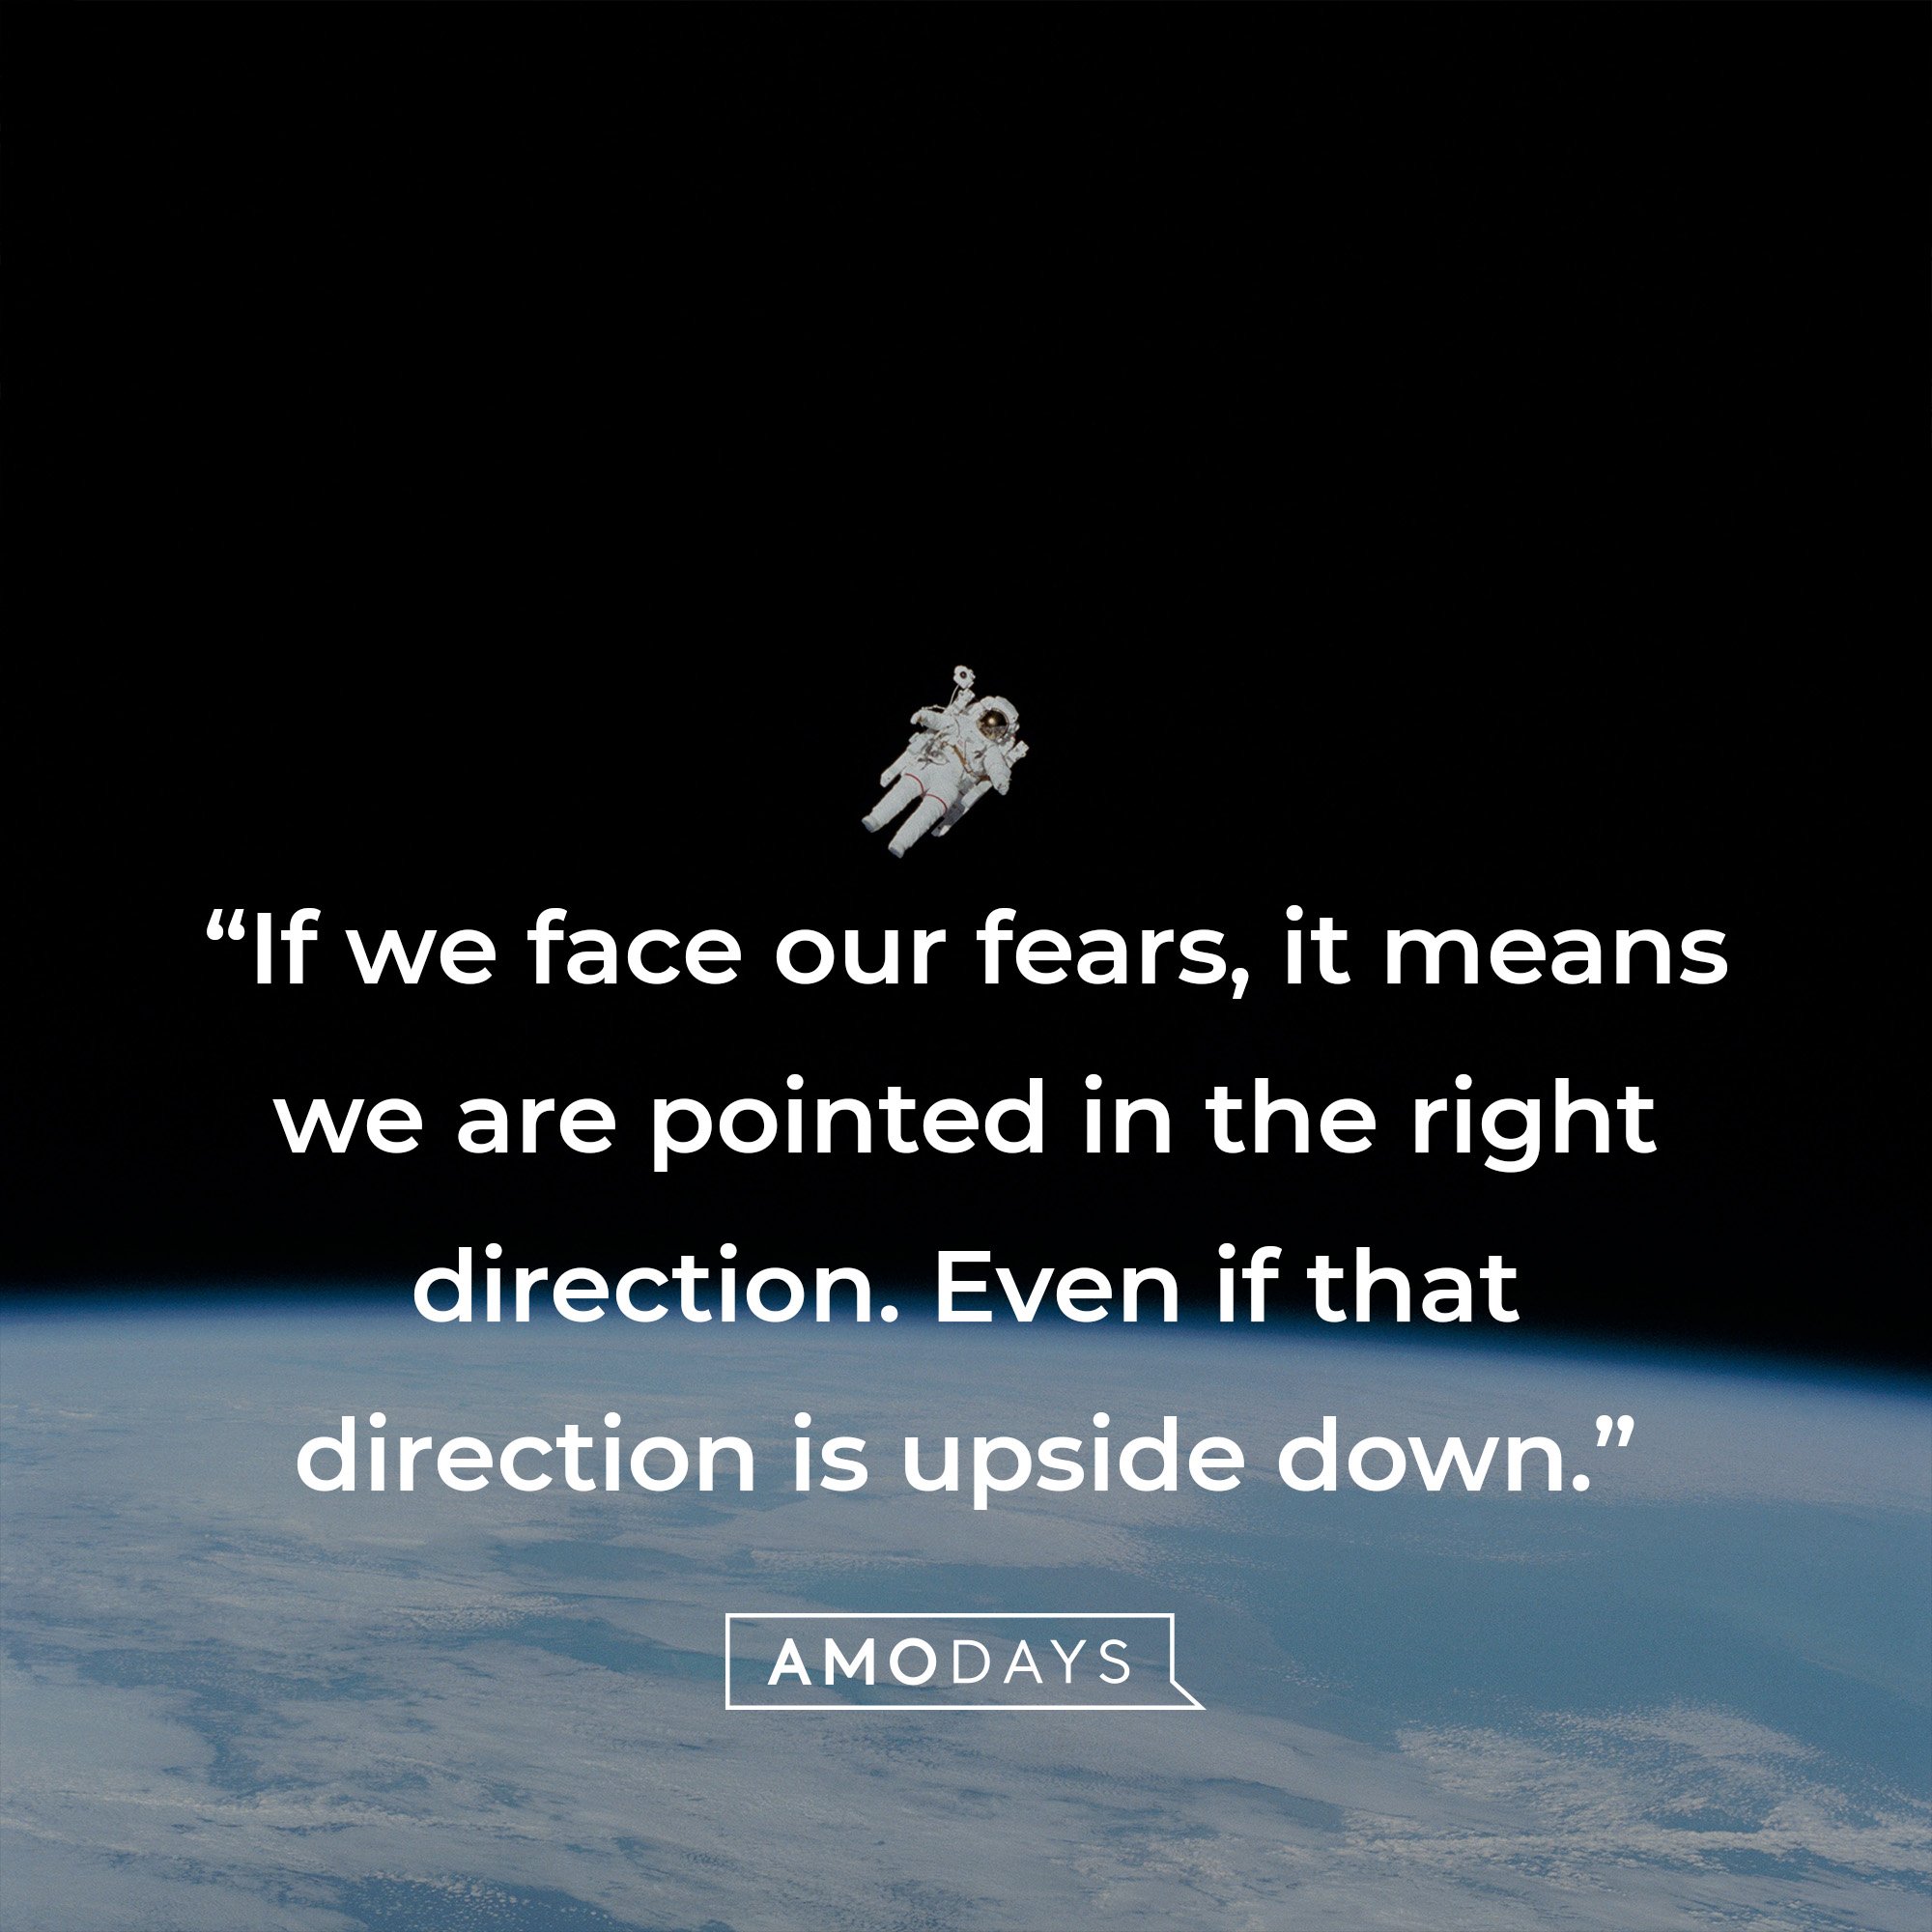 Nike’s quote: "If we face our fears, it means we are pointed in the right direction. Even if that direction is upside down.” | Source: AmoDays